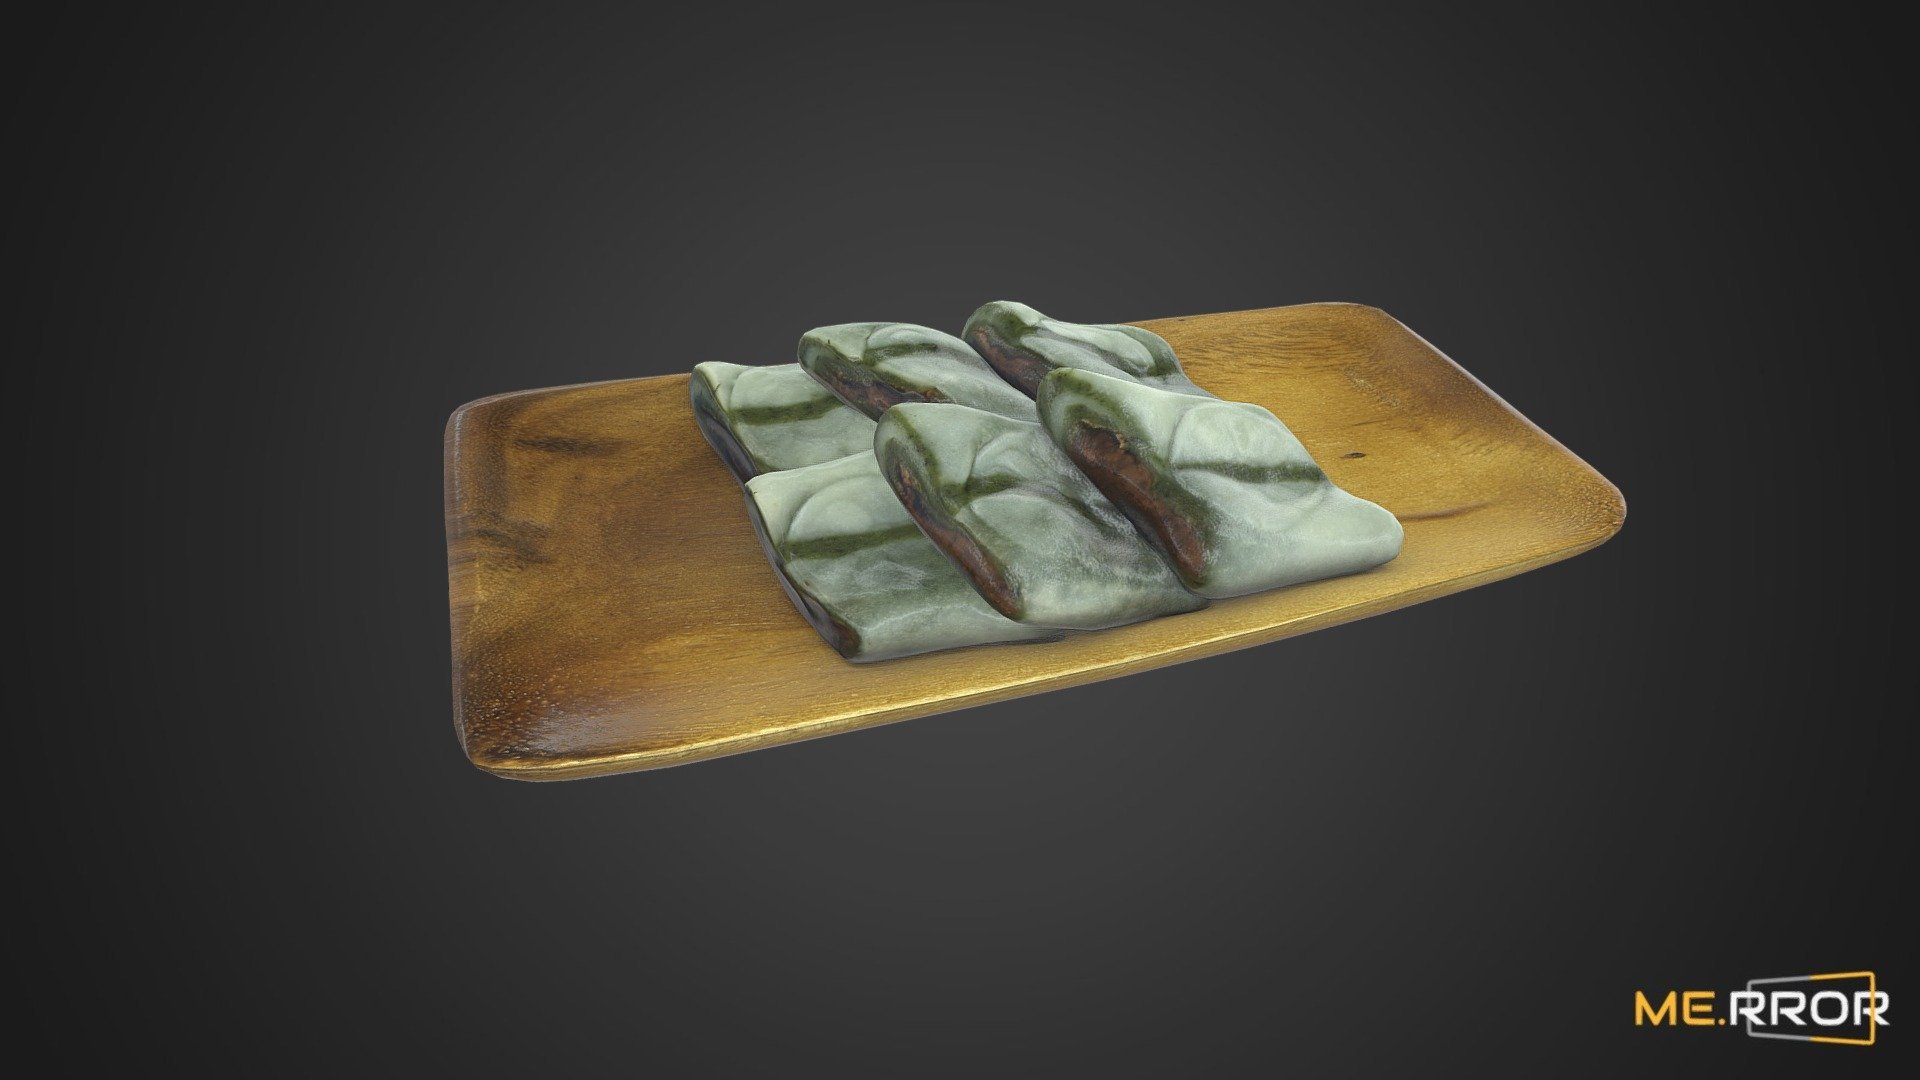 MERROR is a 3D Content PLATFORM which introduces various Asian assets to the 3D world

#3DScanning #Photogrametry #ME.RROR - [Game-Ready] Korea RIce Cake Jeolpyeon 2 - Buy Royalty Free 3D model by ME.RROR Studio (@merror) 3d model